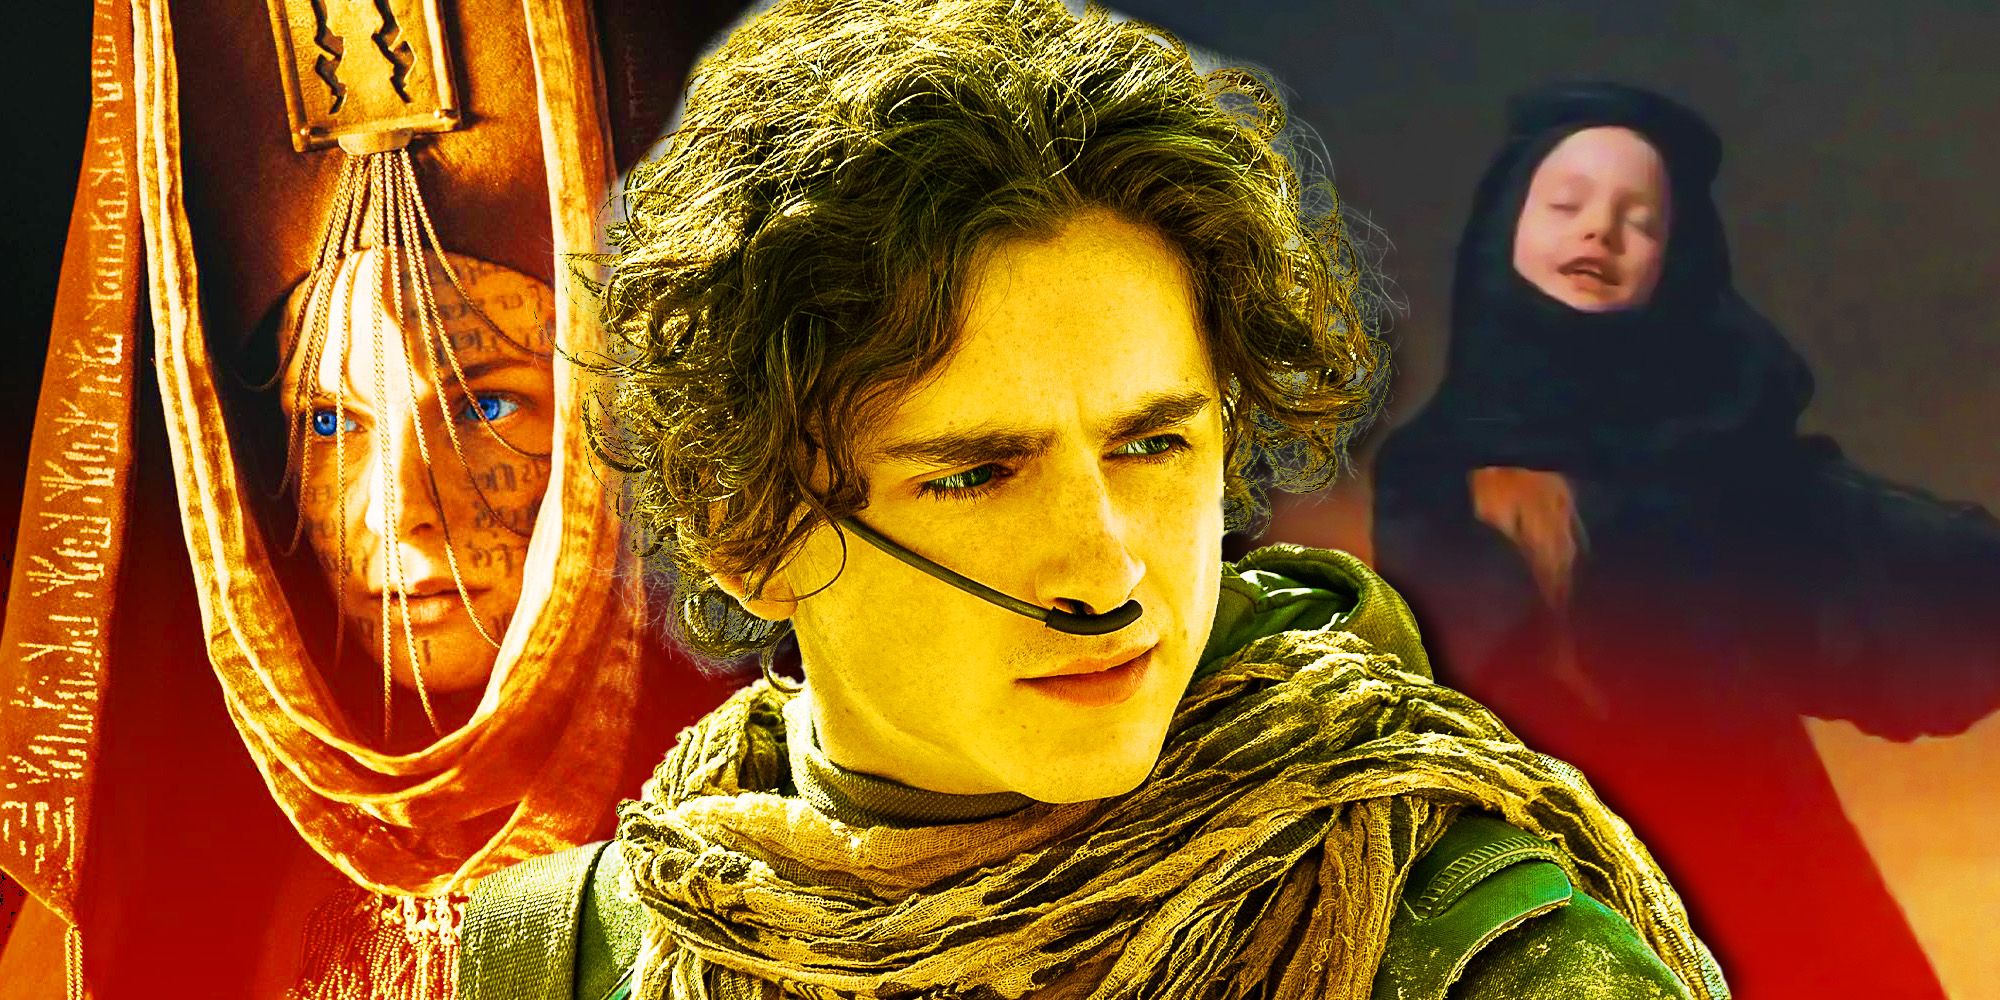 Alia Atreides from Lynch's Dune with Chalamet's Paul and Lady Jessica from Dune 2